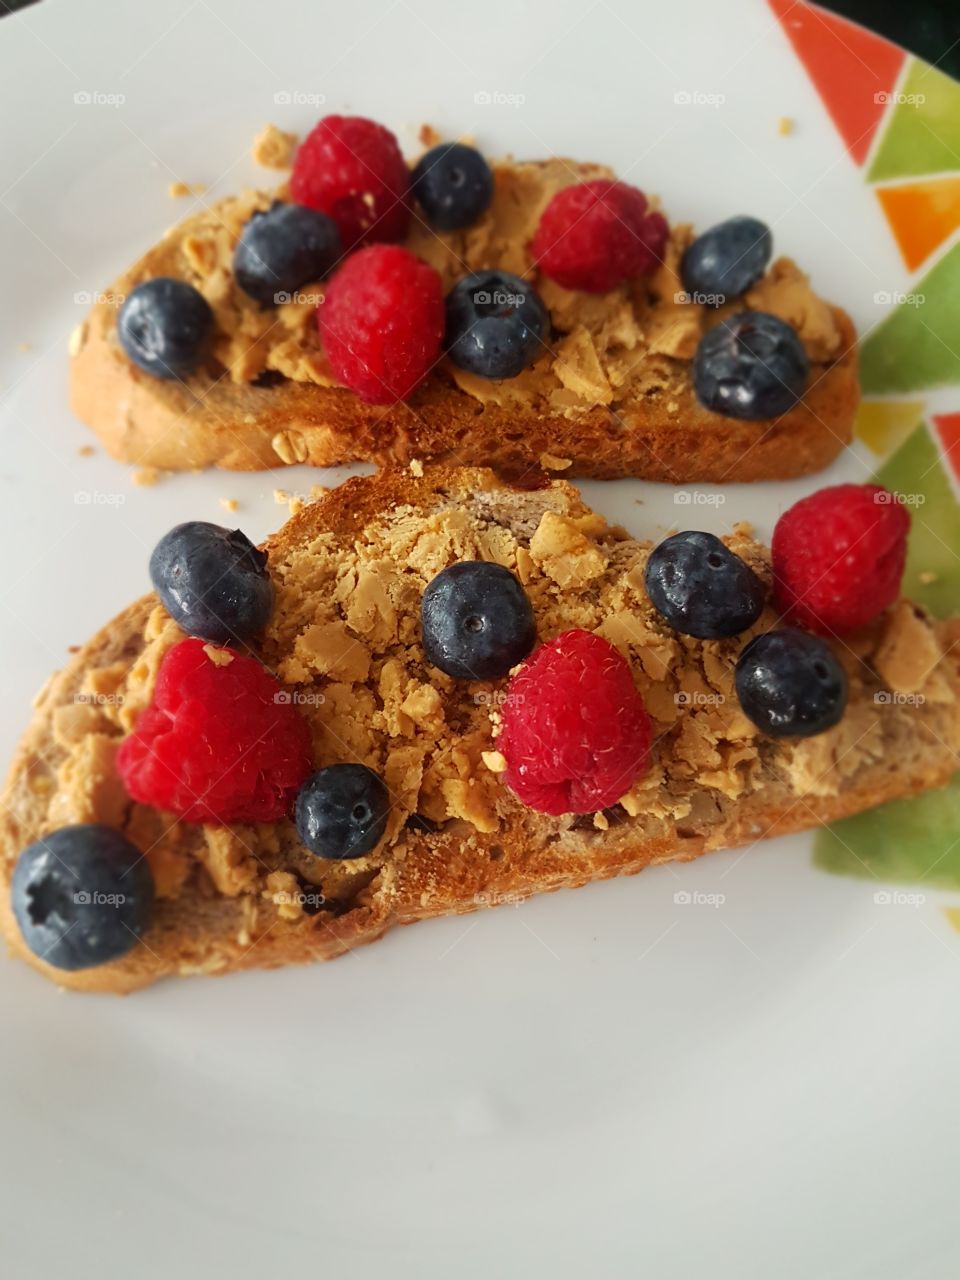 Peanut butter and berry toast